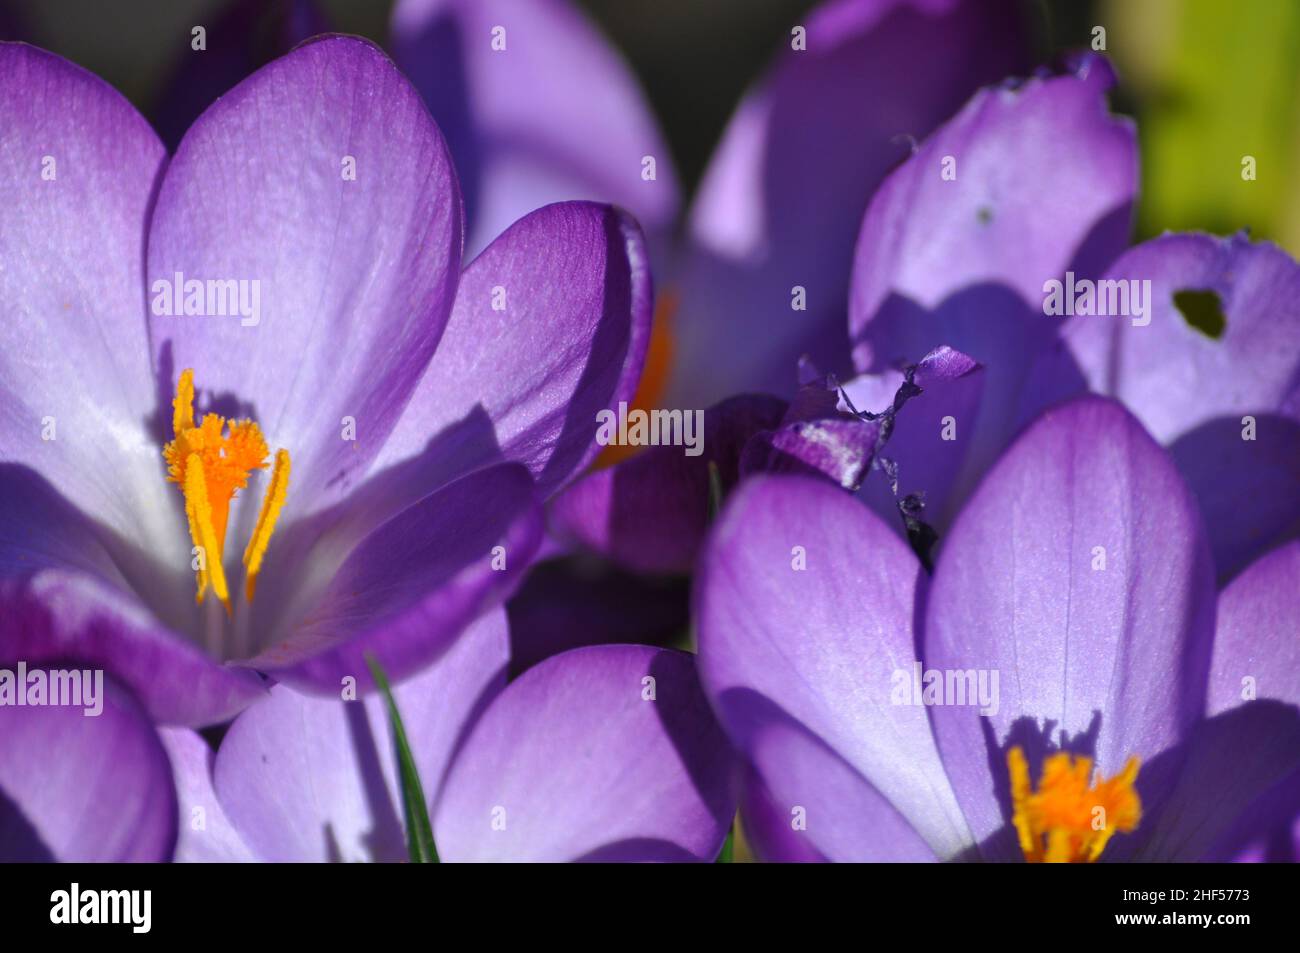 A collection of purple crocus flowers (crociudear) with opened petals growing in a garden in spring time, UK Stock Photo